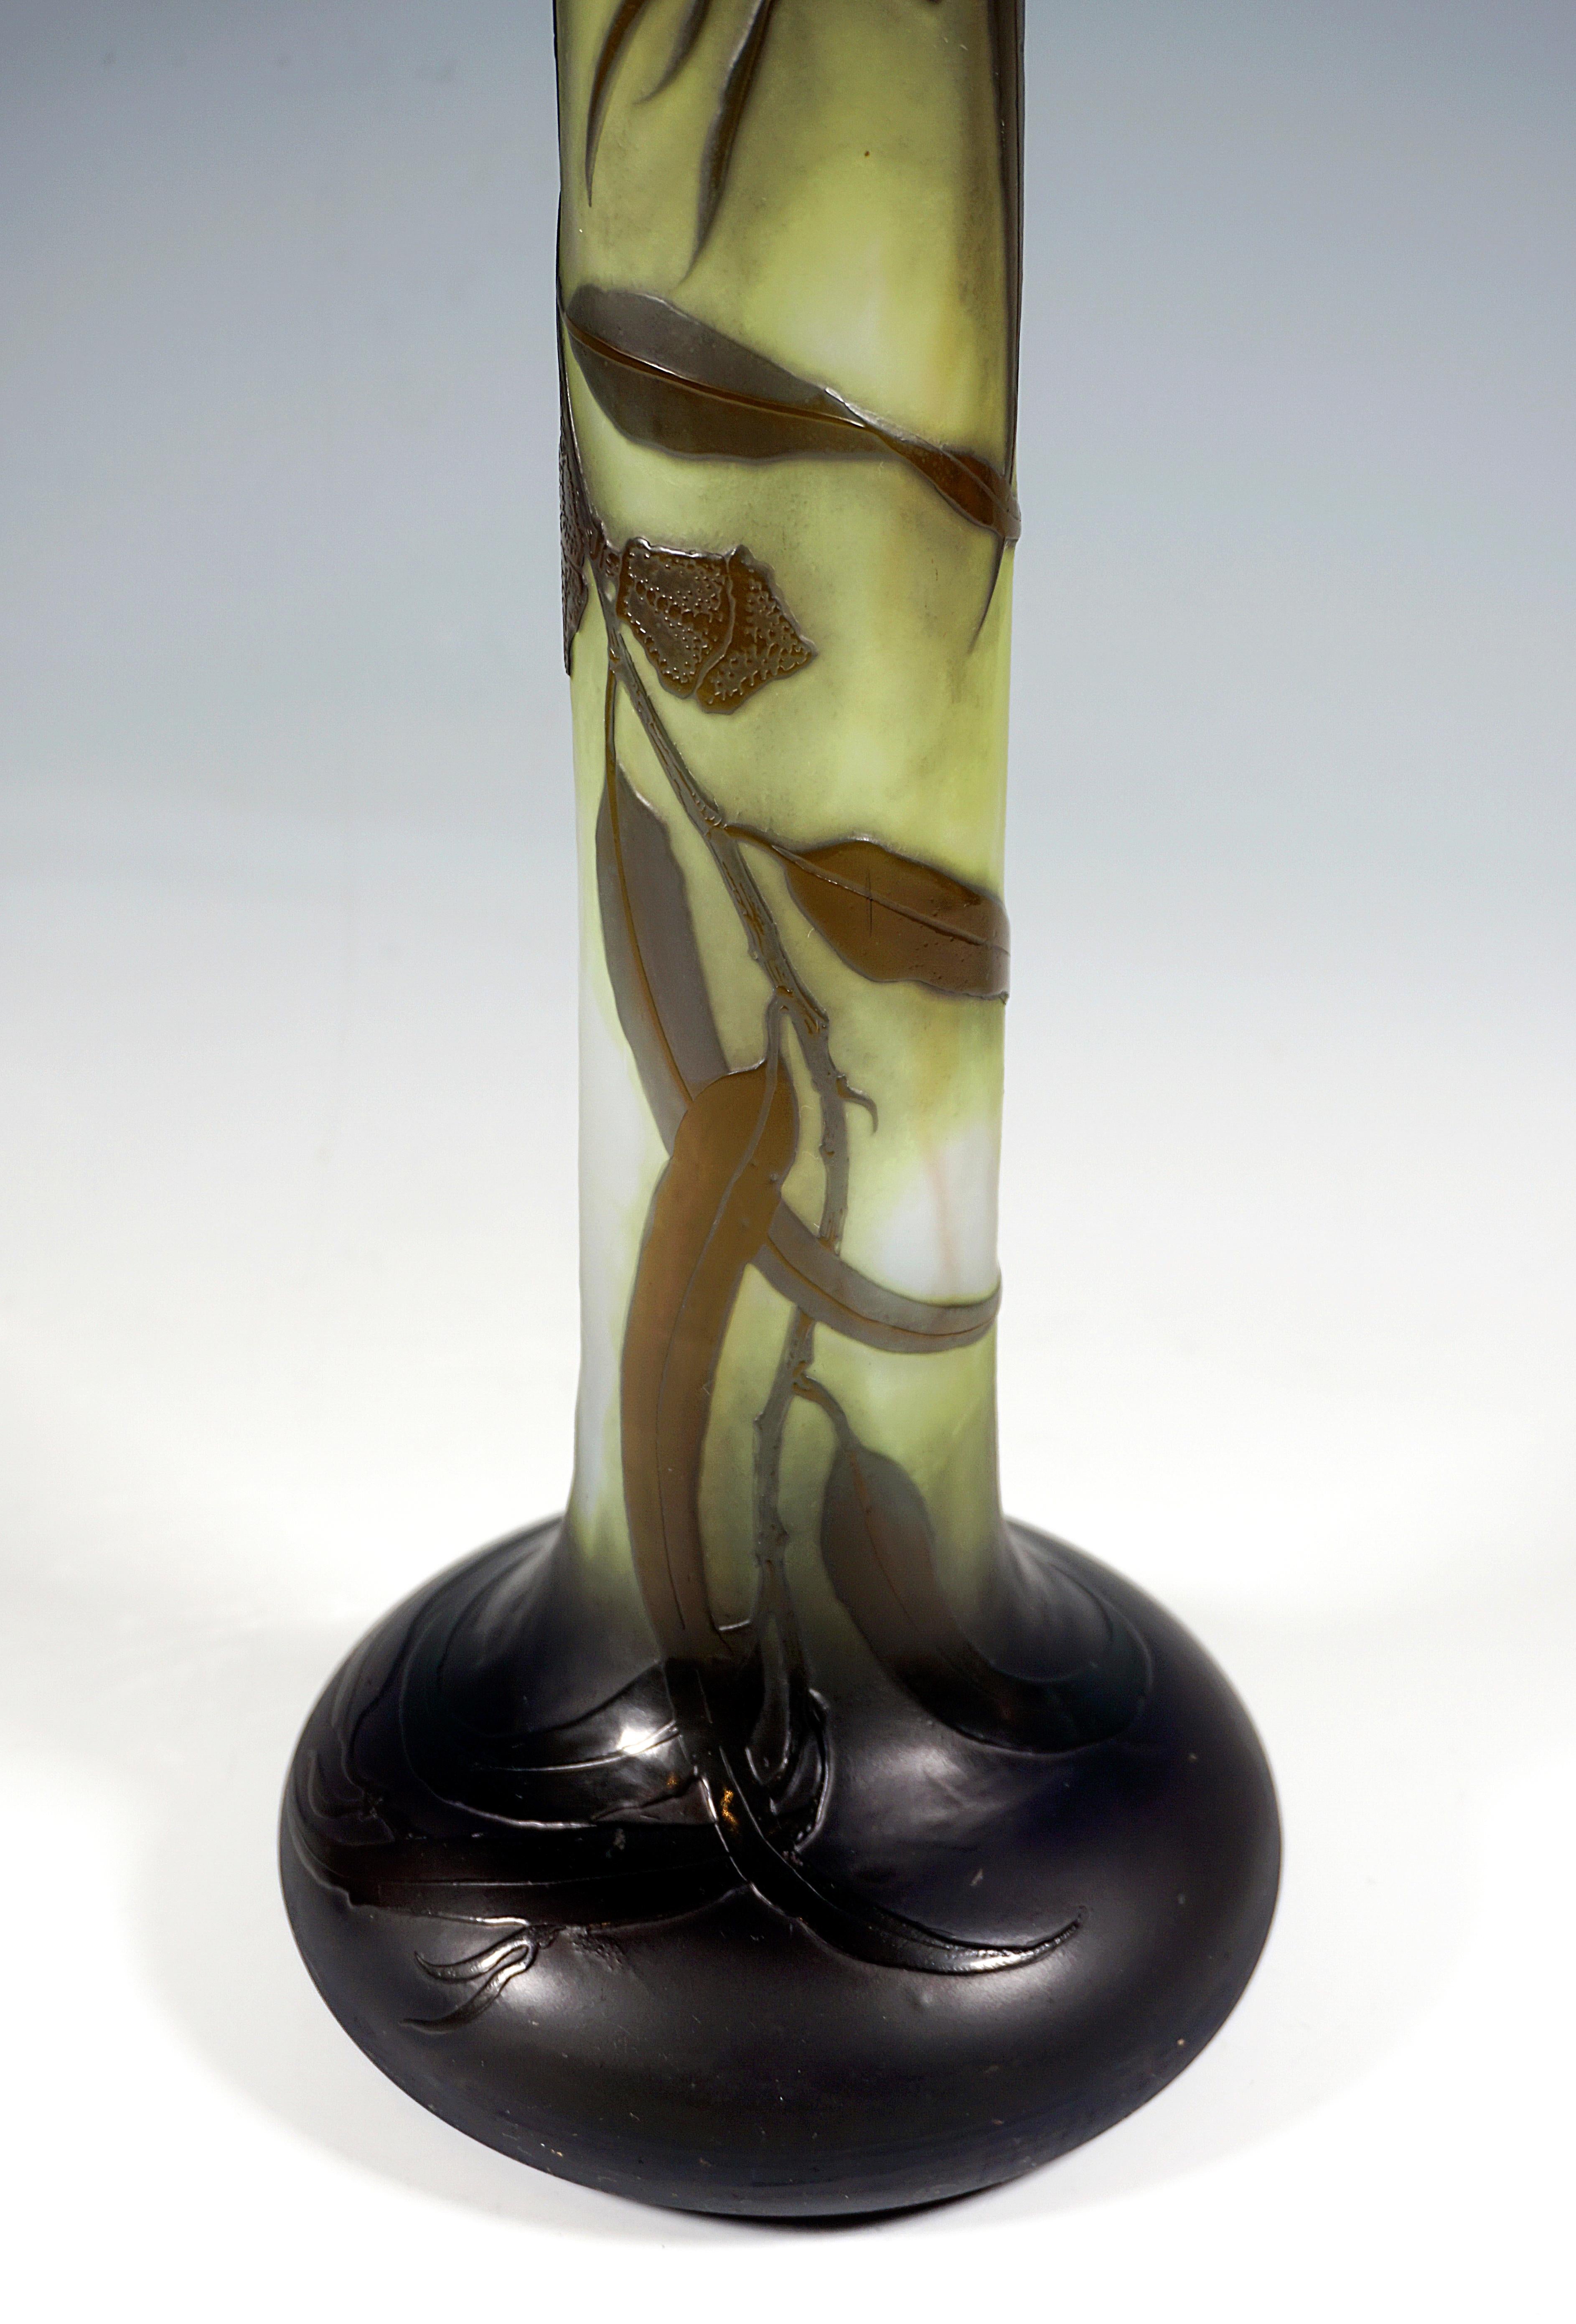 Large Émile Gallé Art Nouveau Cameo Vase Flower and Leaf Decor France circa 1904 In Good Condition For Sale In Vienna, AT